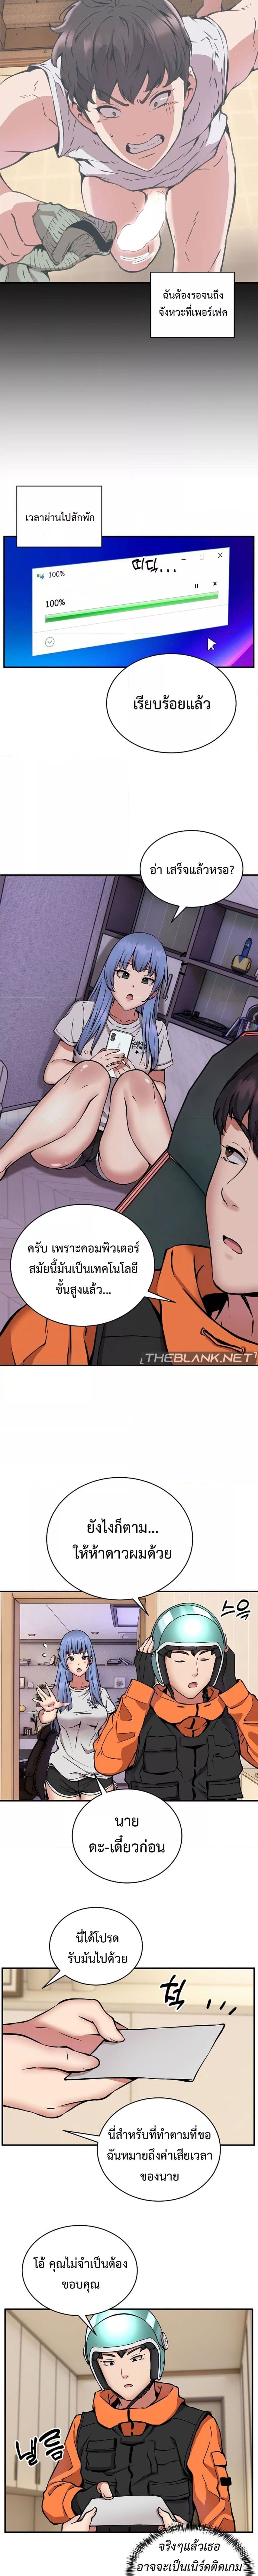 Driver in the New City ตอนที่ 12 ภาพ 8